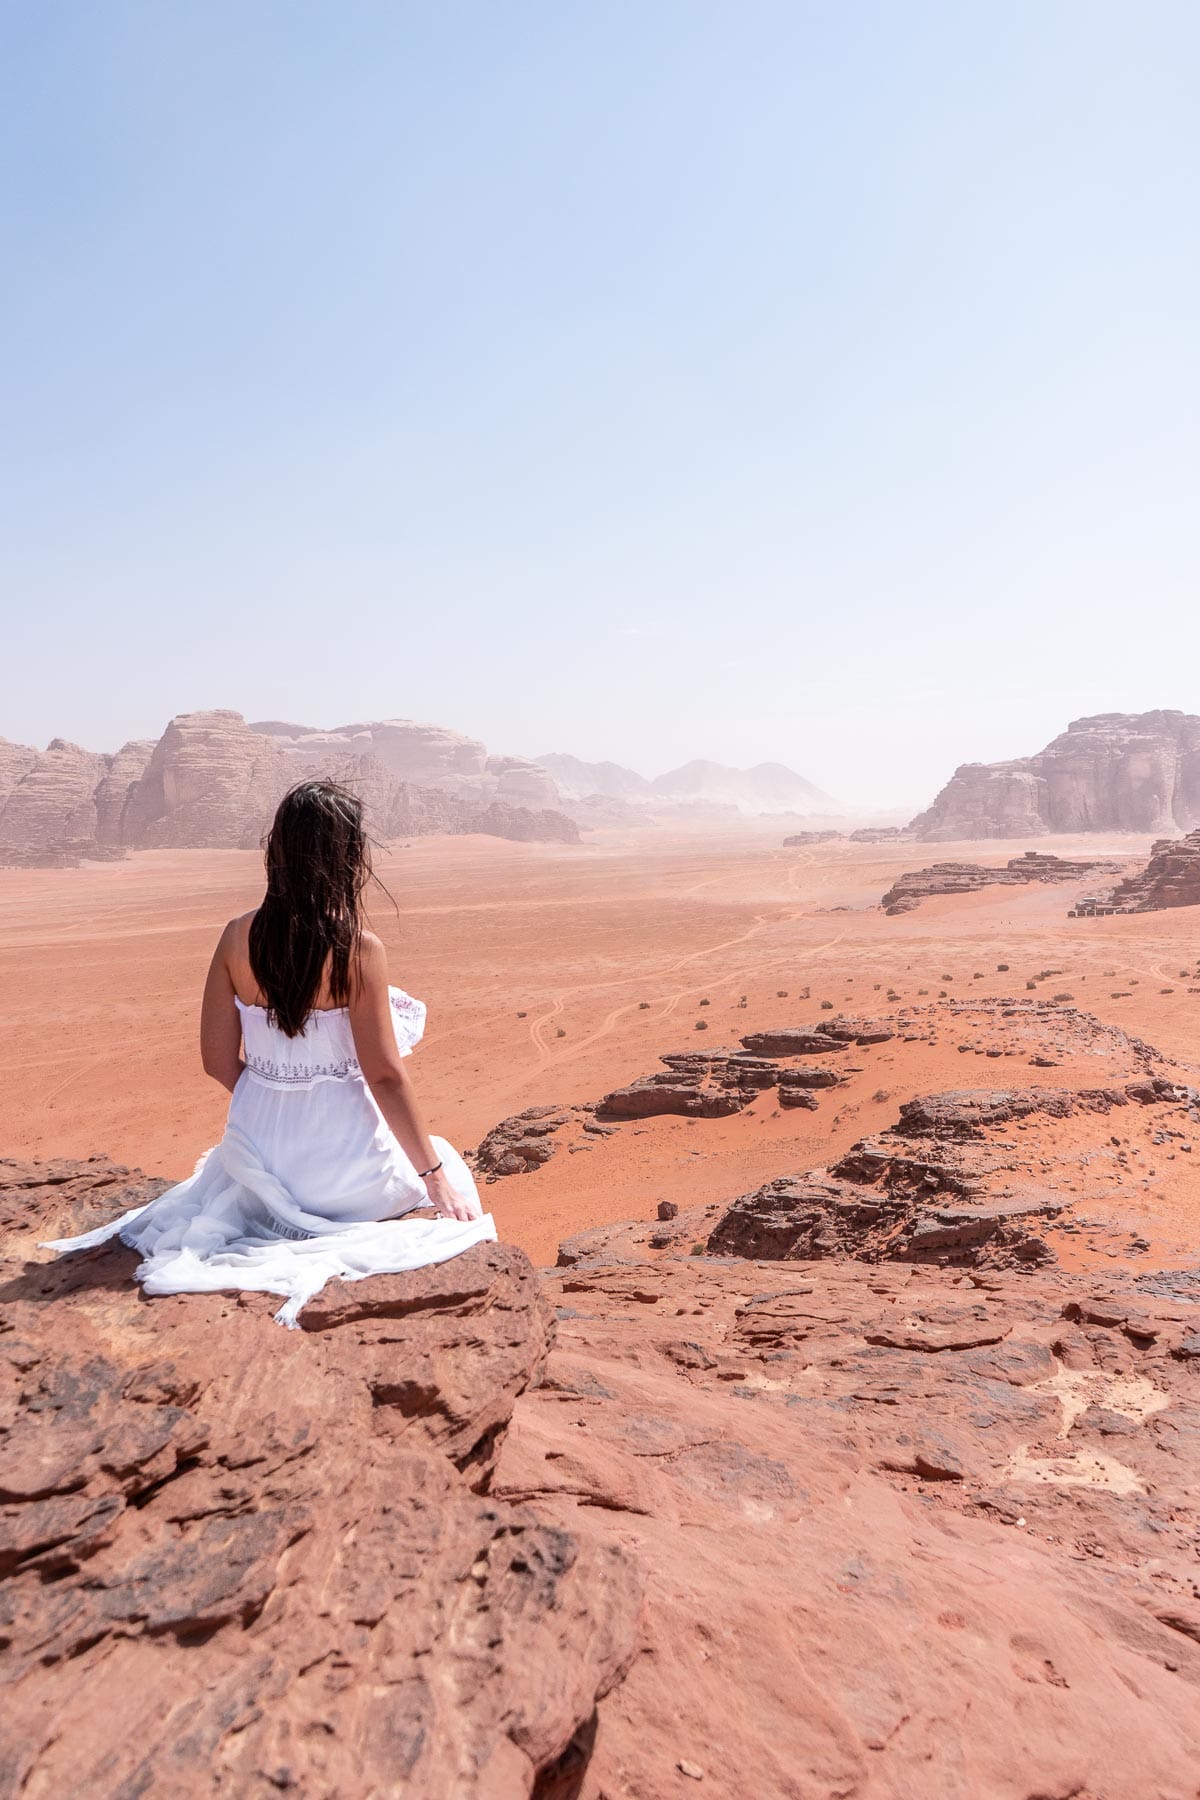 Girl in a white dress looking at the view in the Wadi Rum, Jordan